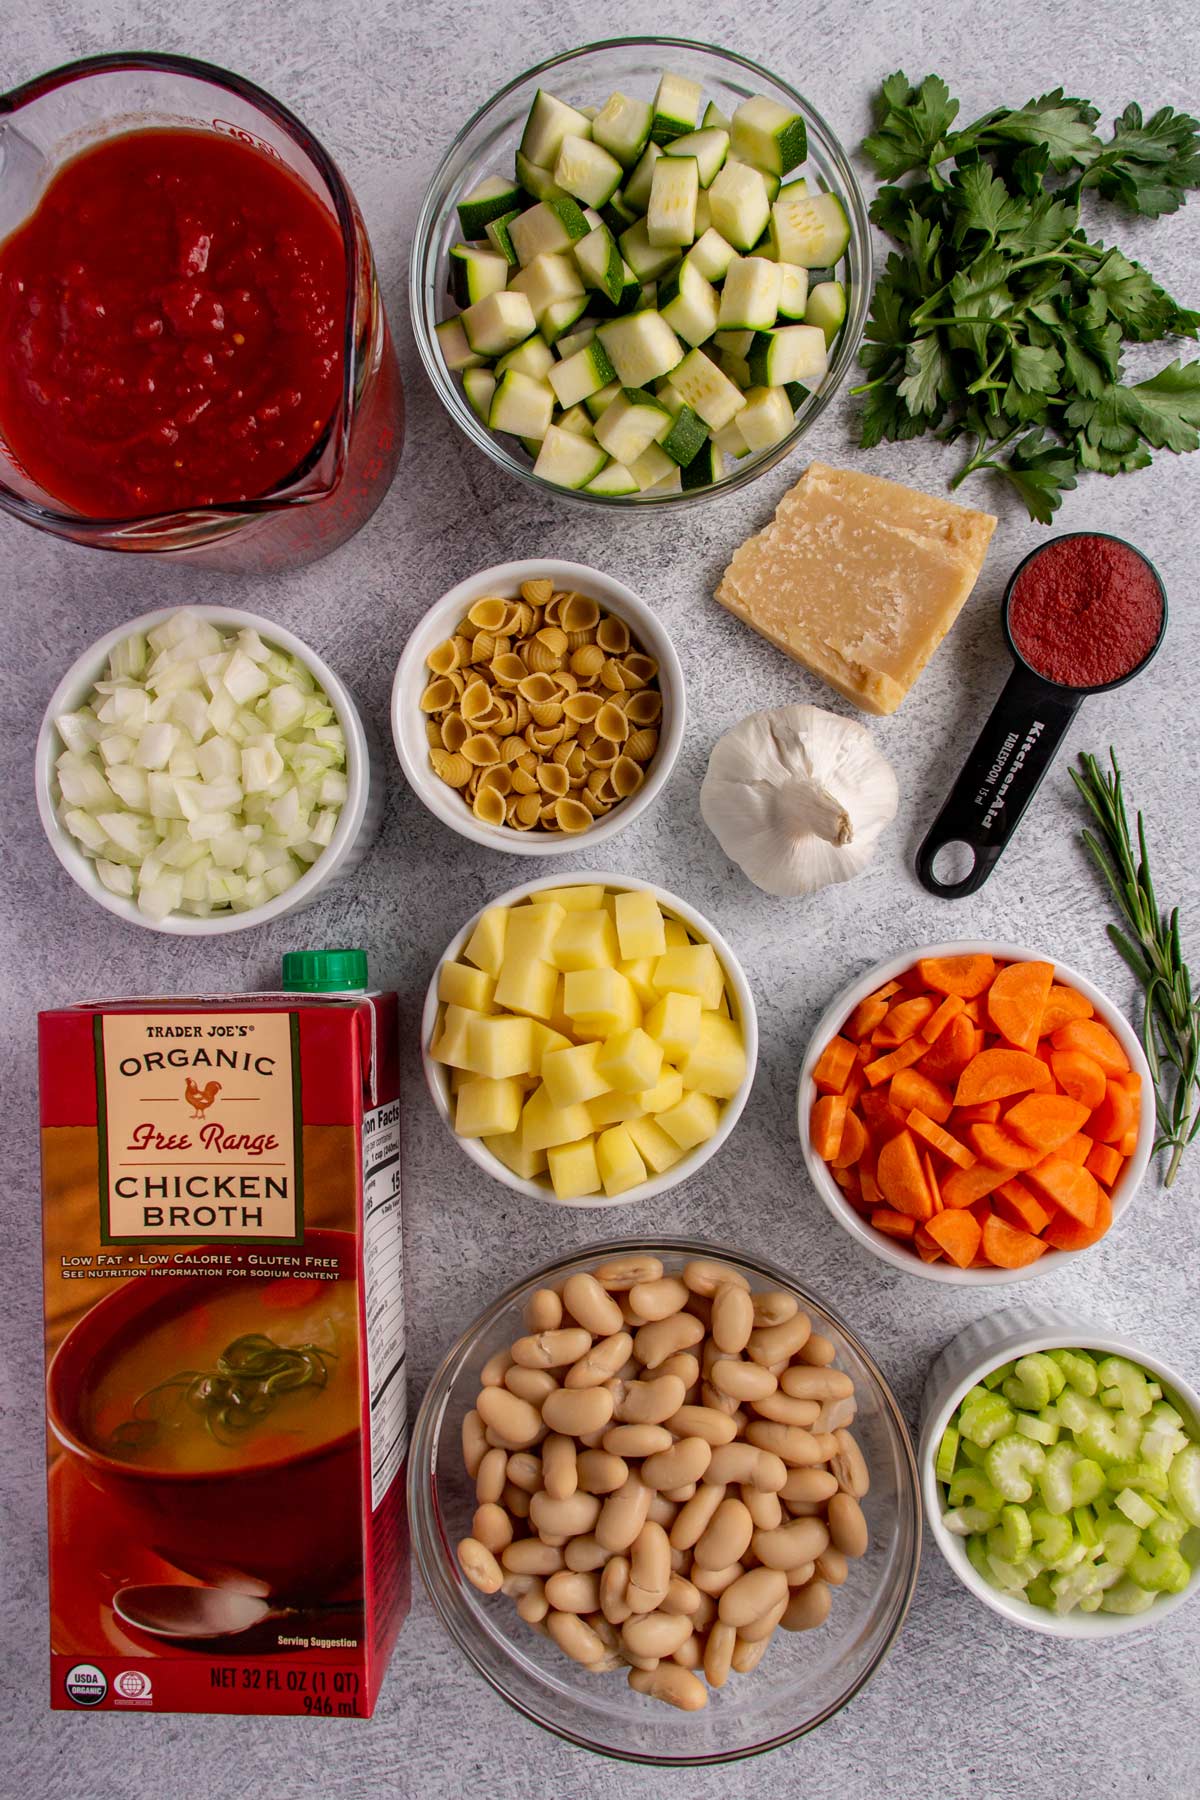 Ingredients for Italian minestrone soup on a light grey background.